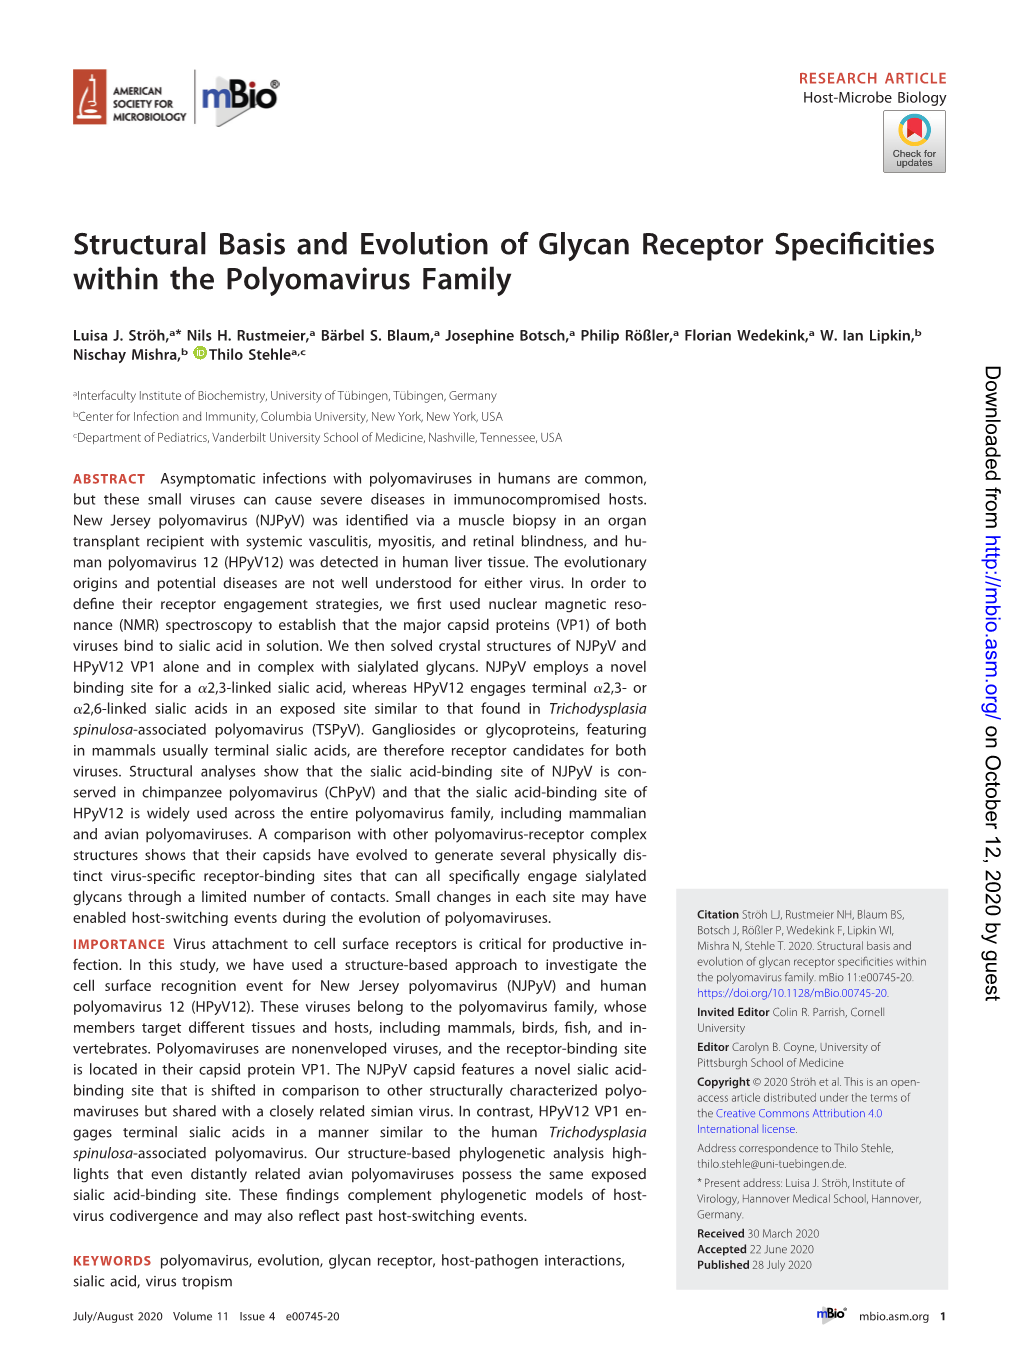 Structural Basis and Evolution of Glycan Receptor Specificities Within the Polyomavirus Family